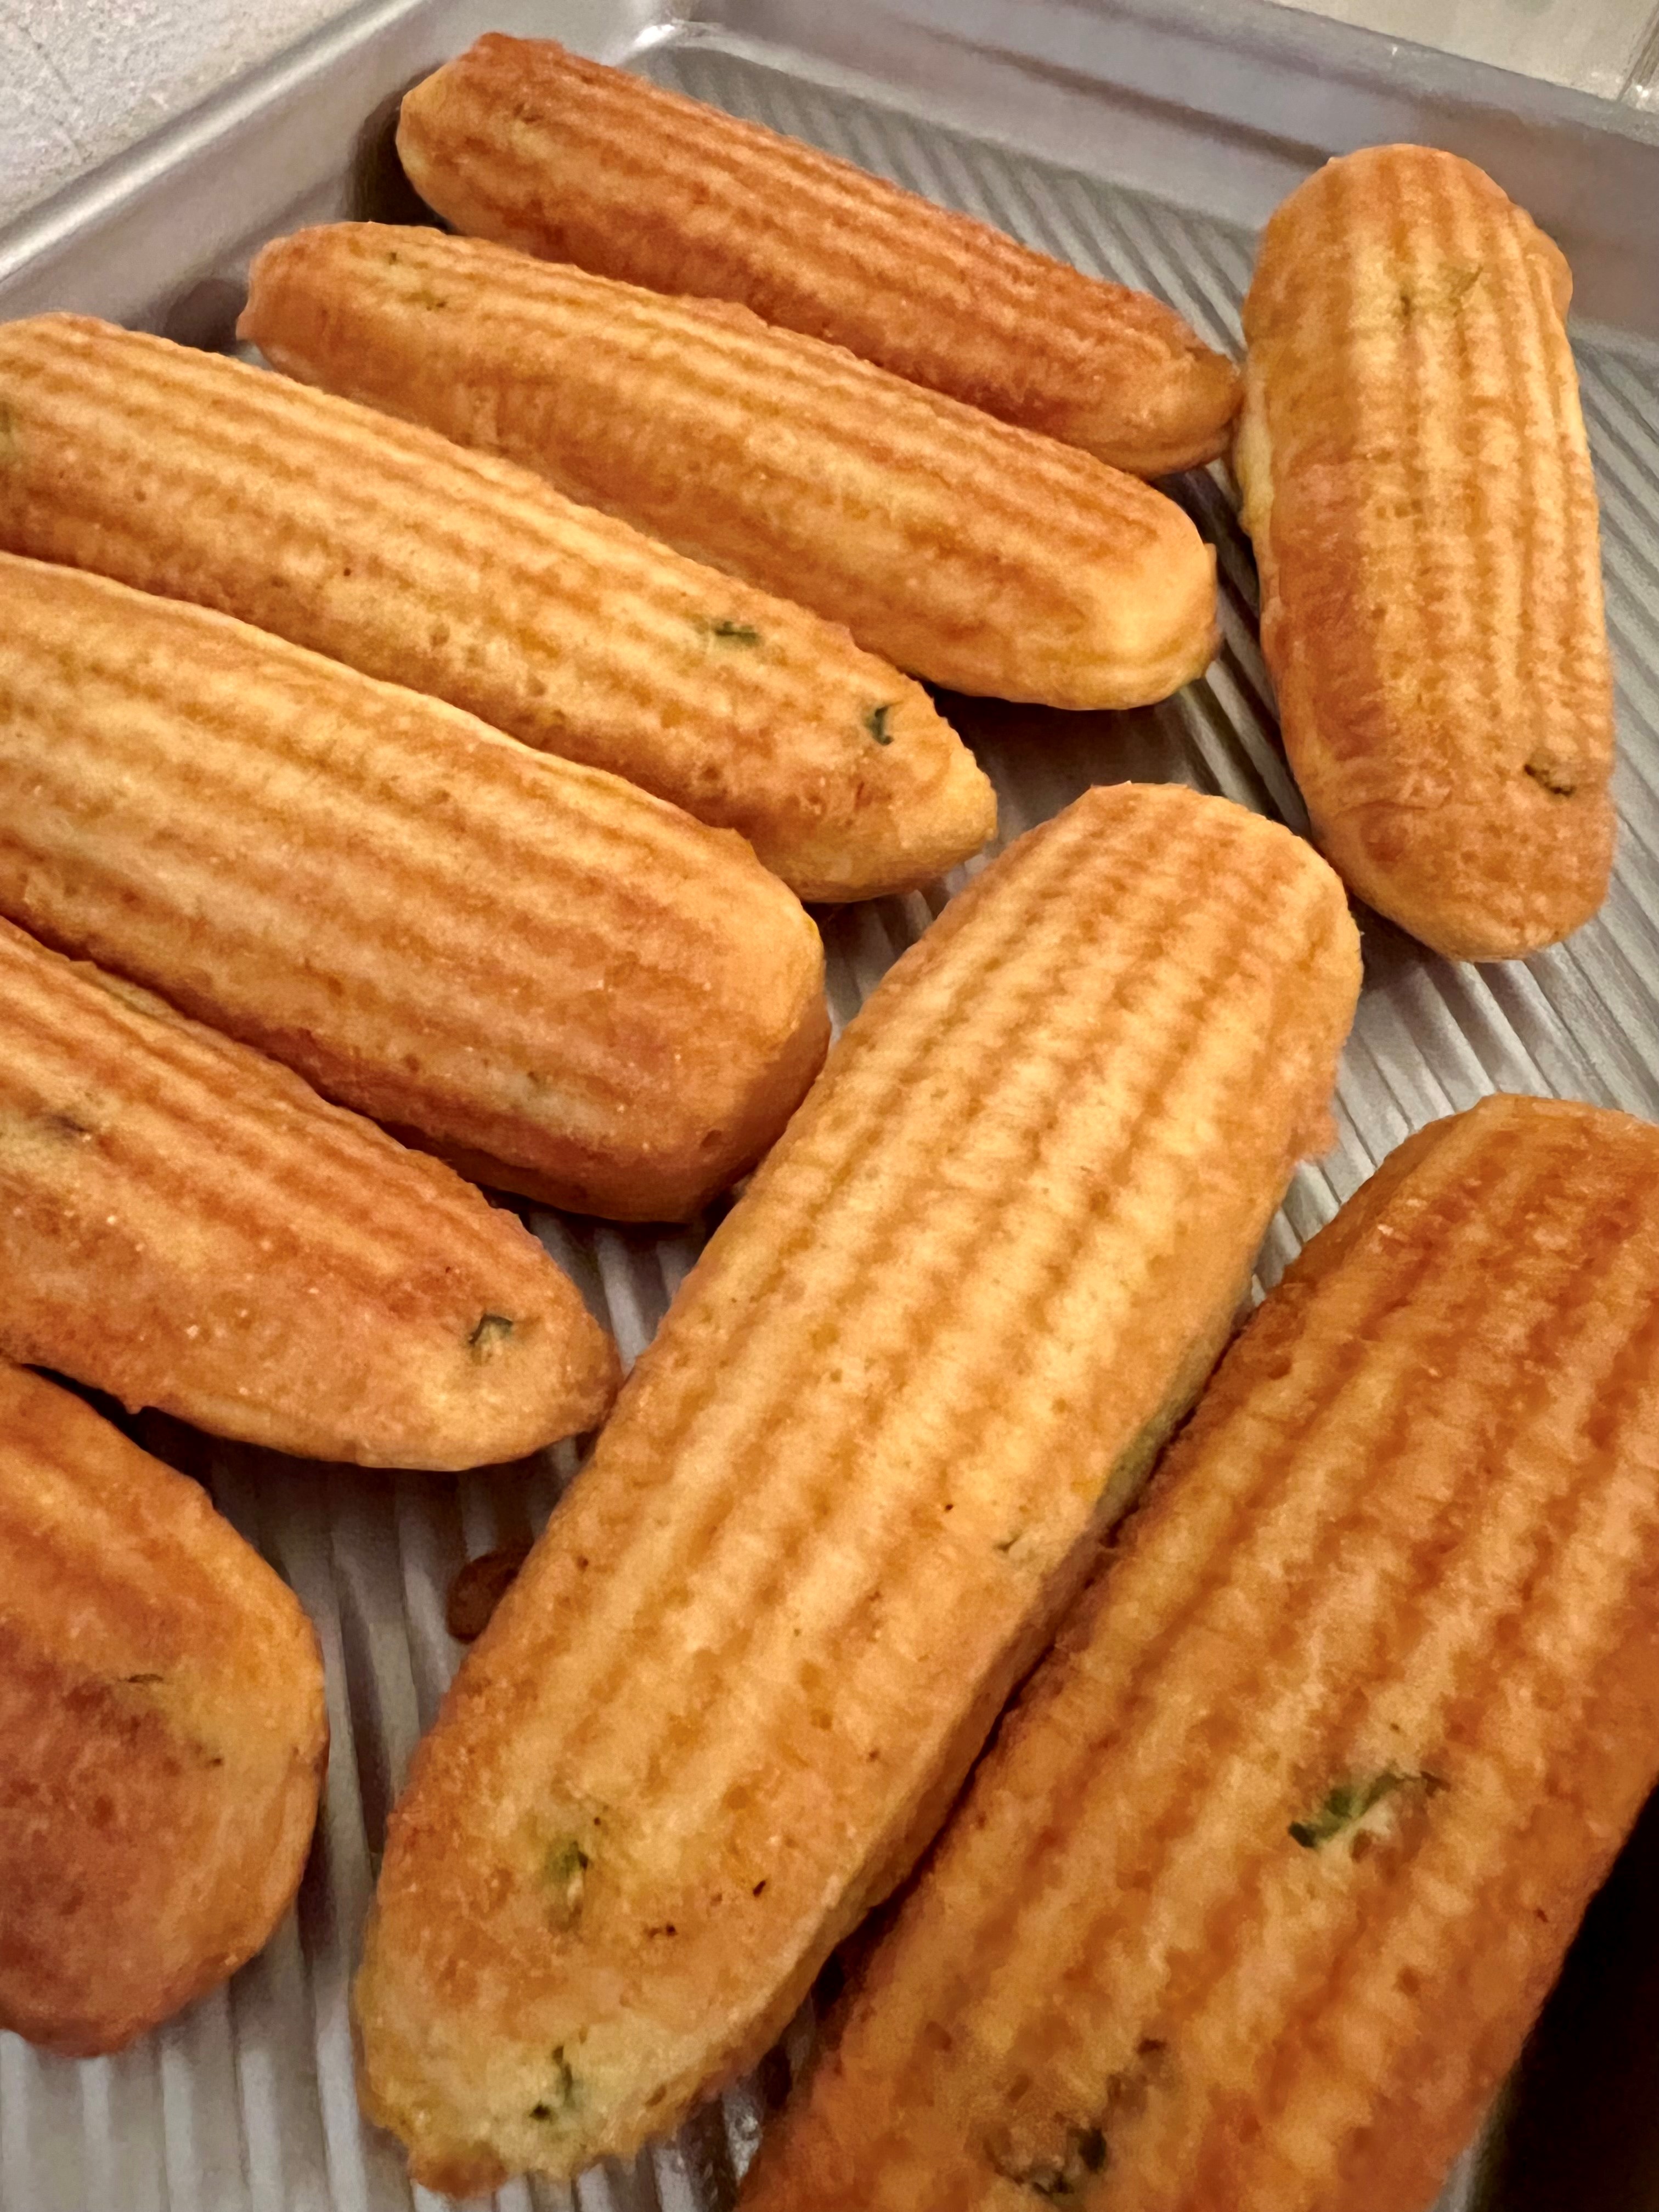 Grilled Cornbread Sticks - Out Grilling